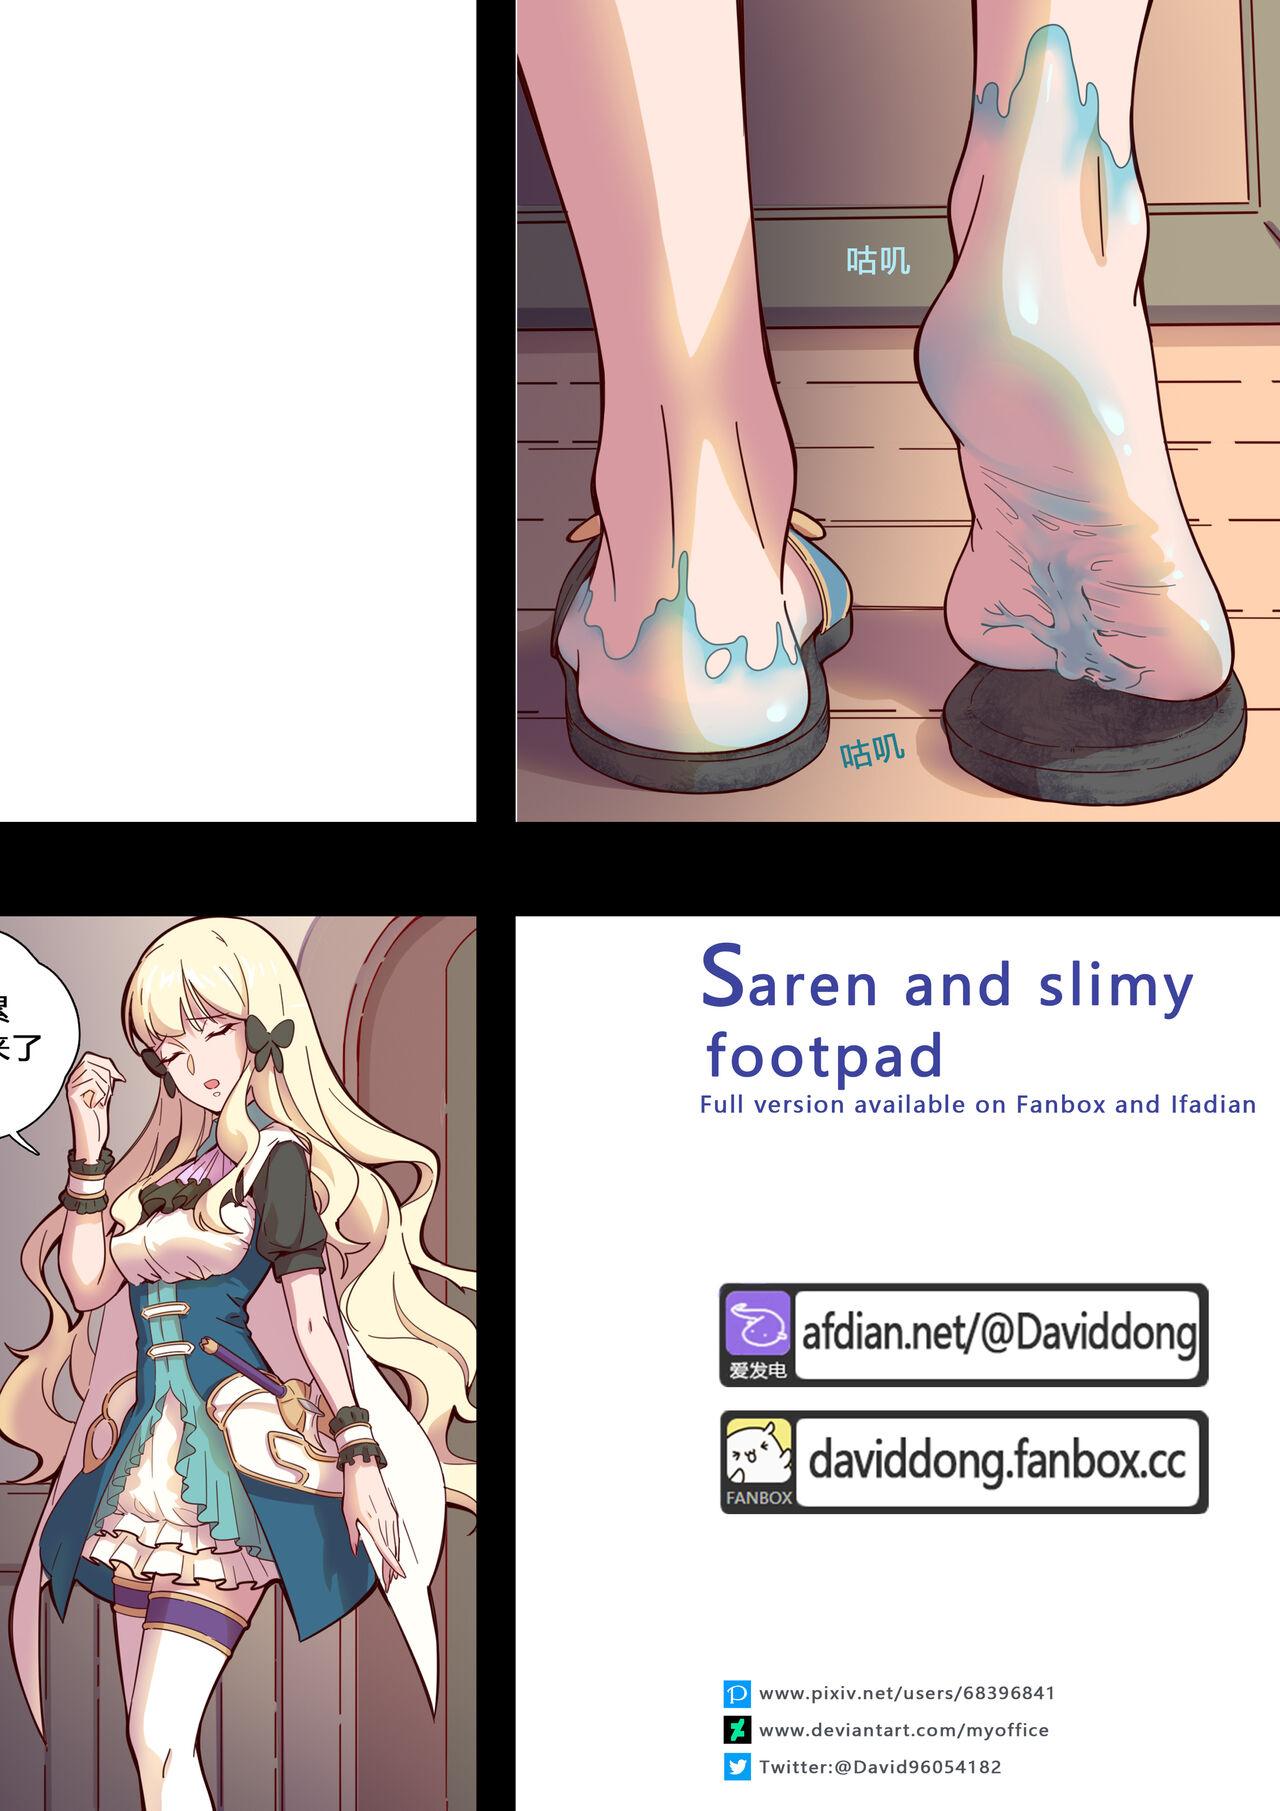 Girl On Girl - Saren and slimy footpad - Princess connect Hung - Page 1